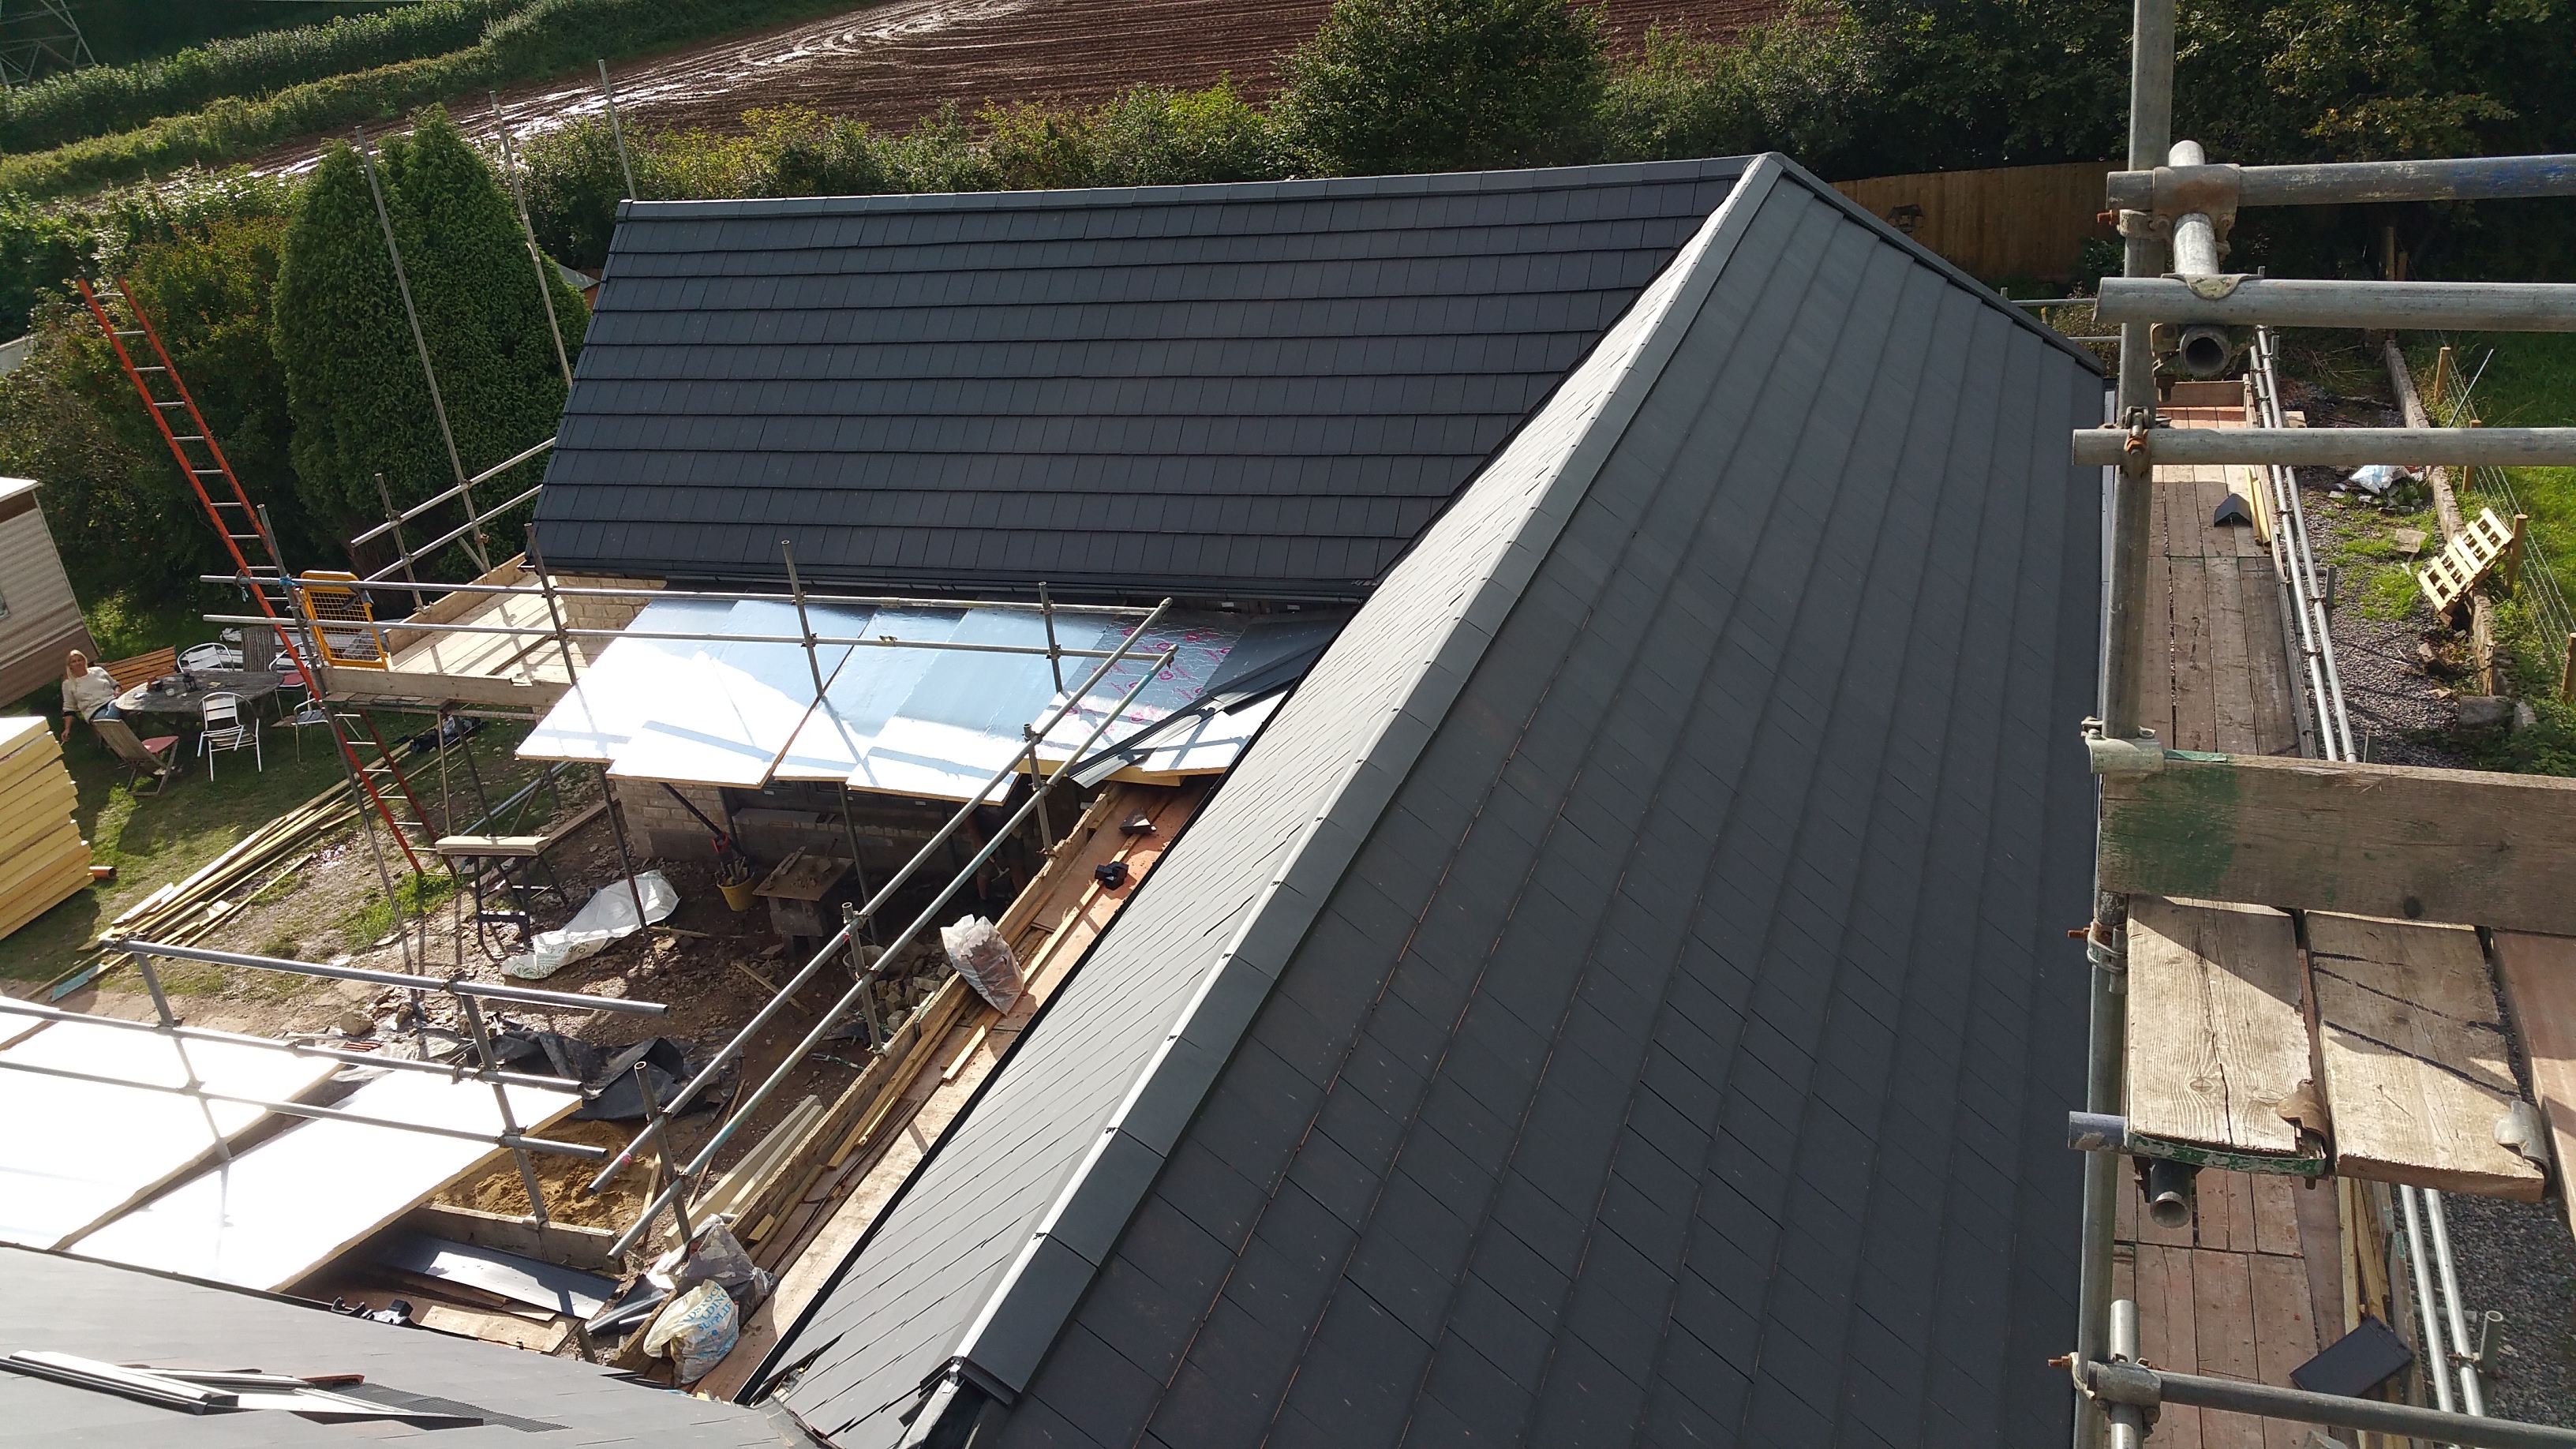 Verea smooth slate clay tile on large self build house roof